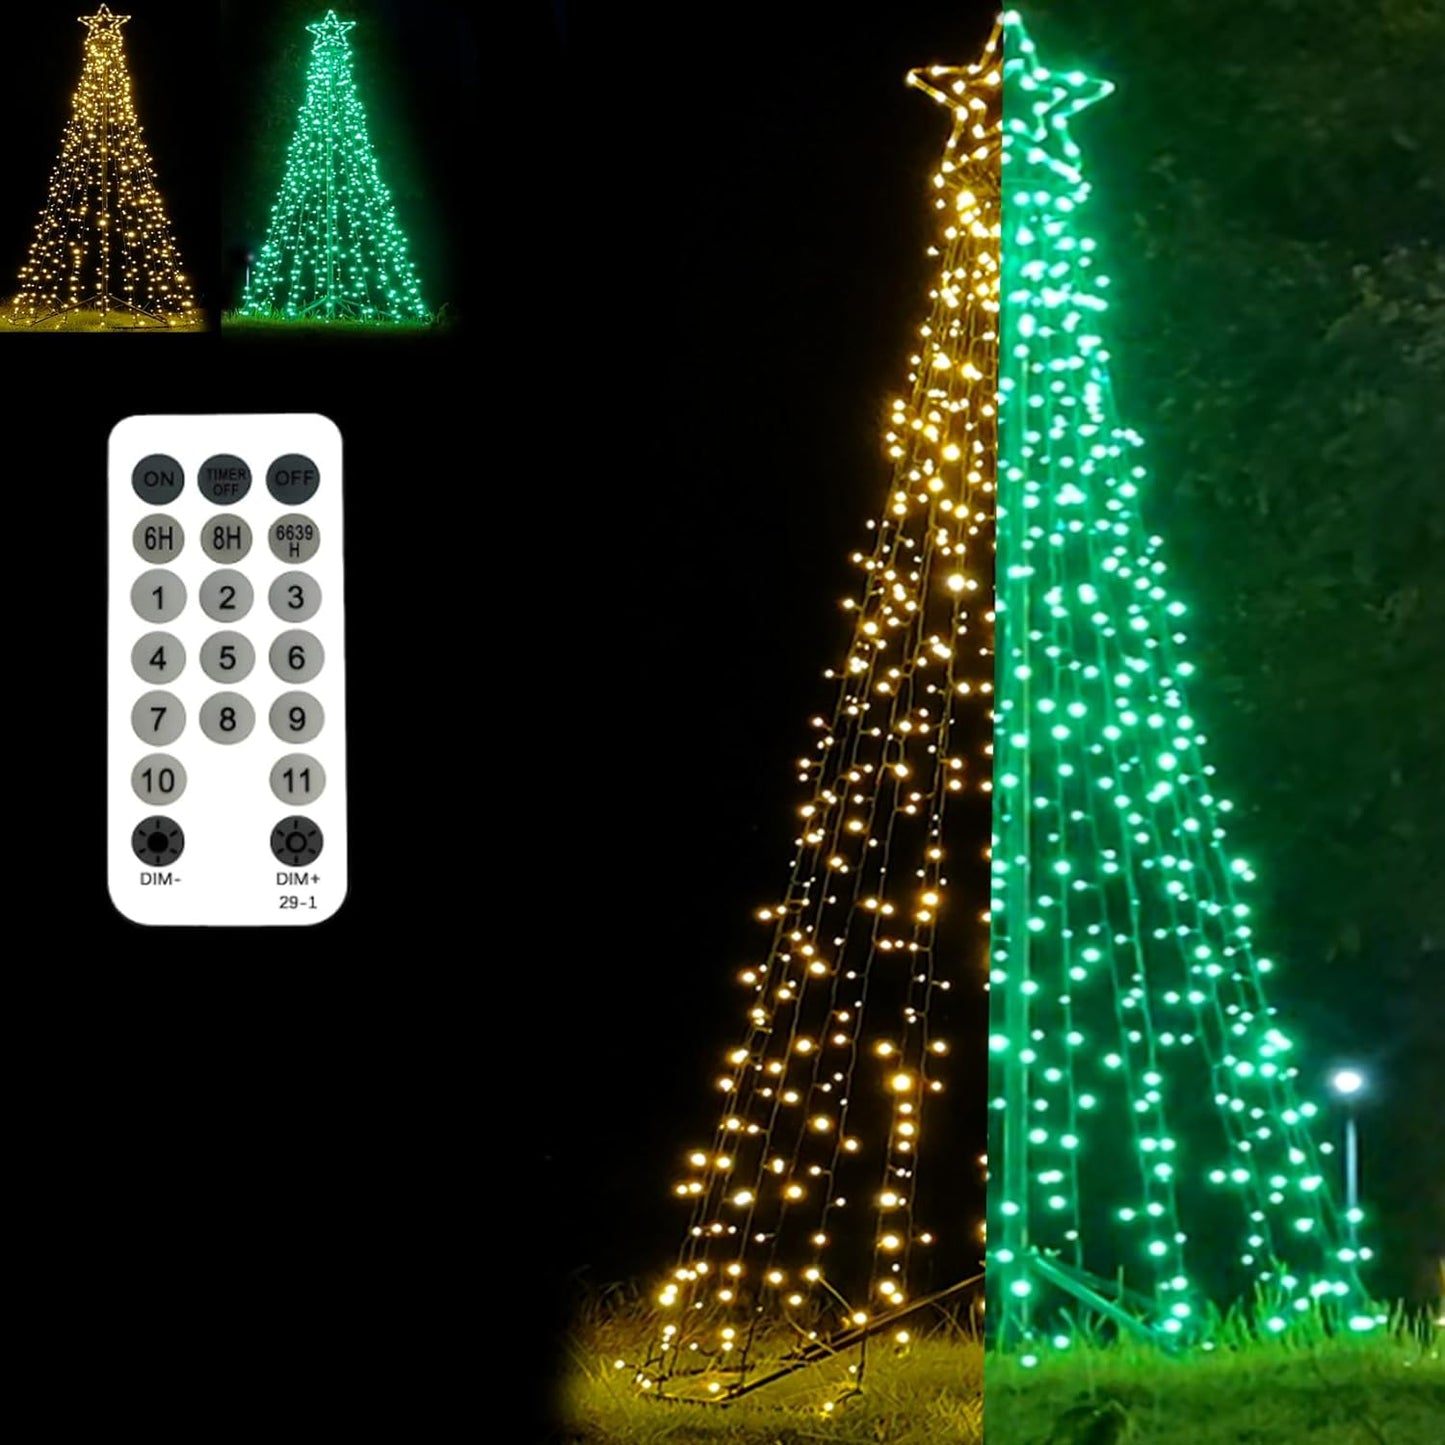 Outdoor Lighting Christmas Tree Lights Cone Tall Star Topped Artificial Christmas Trees Arbol de Navidad Outside Decor for Xmas New Year Holiday 7.8Ft WarmWhite/Green